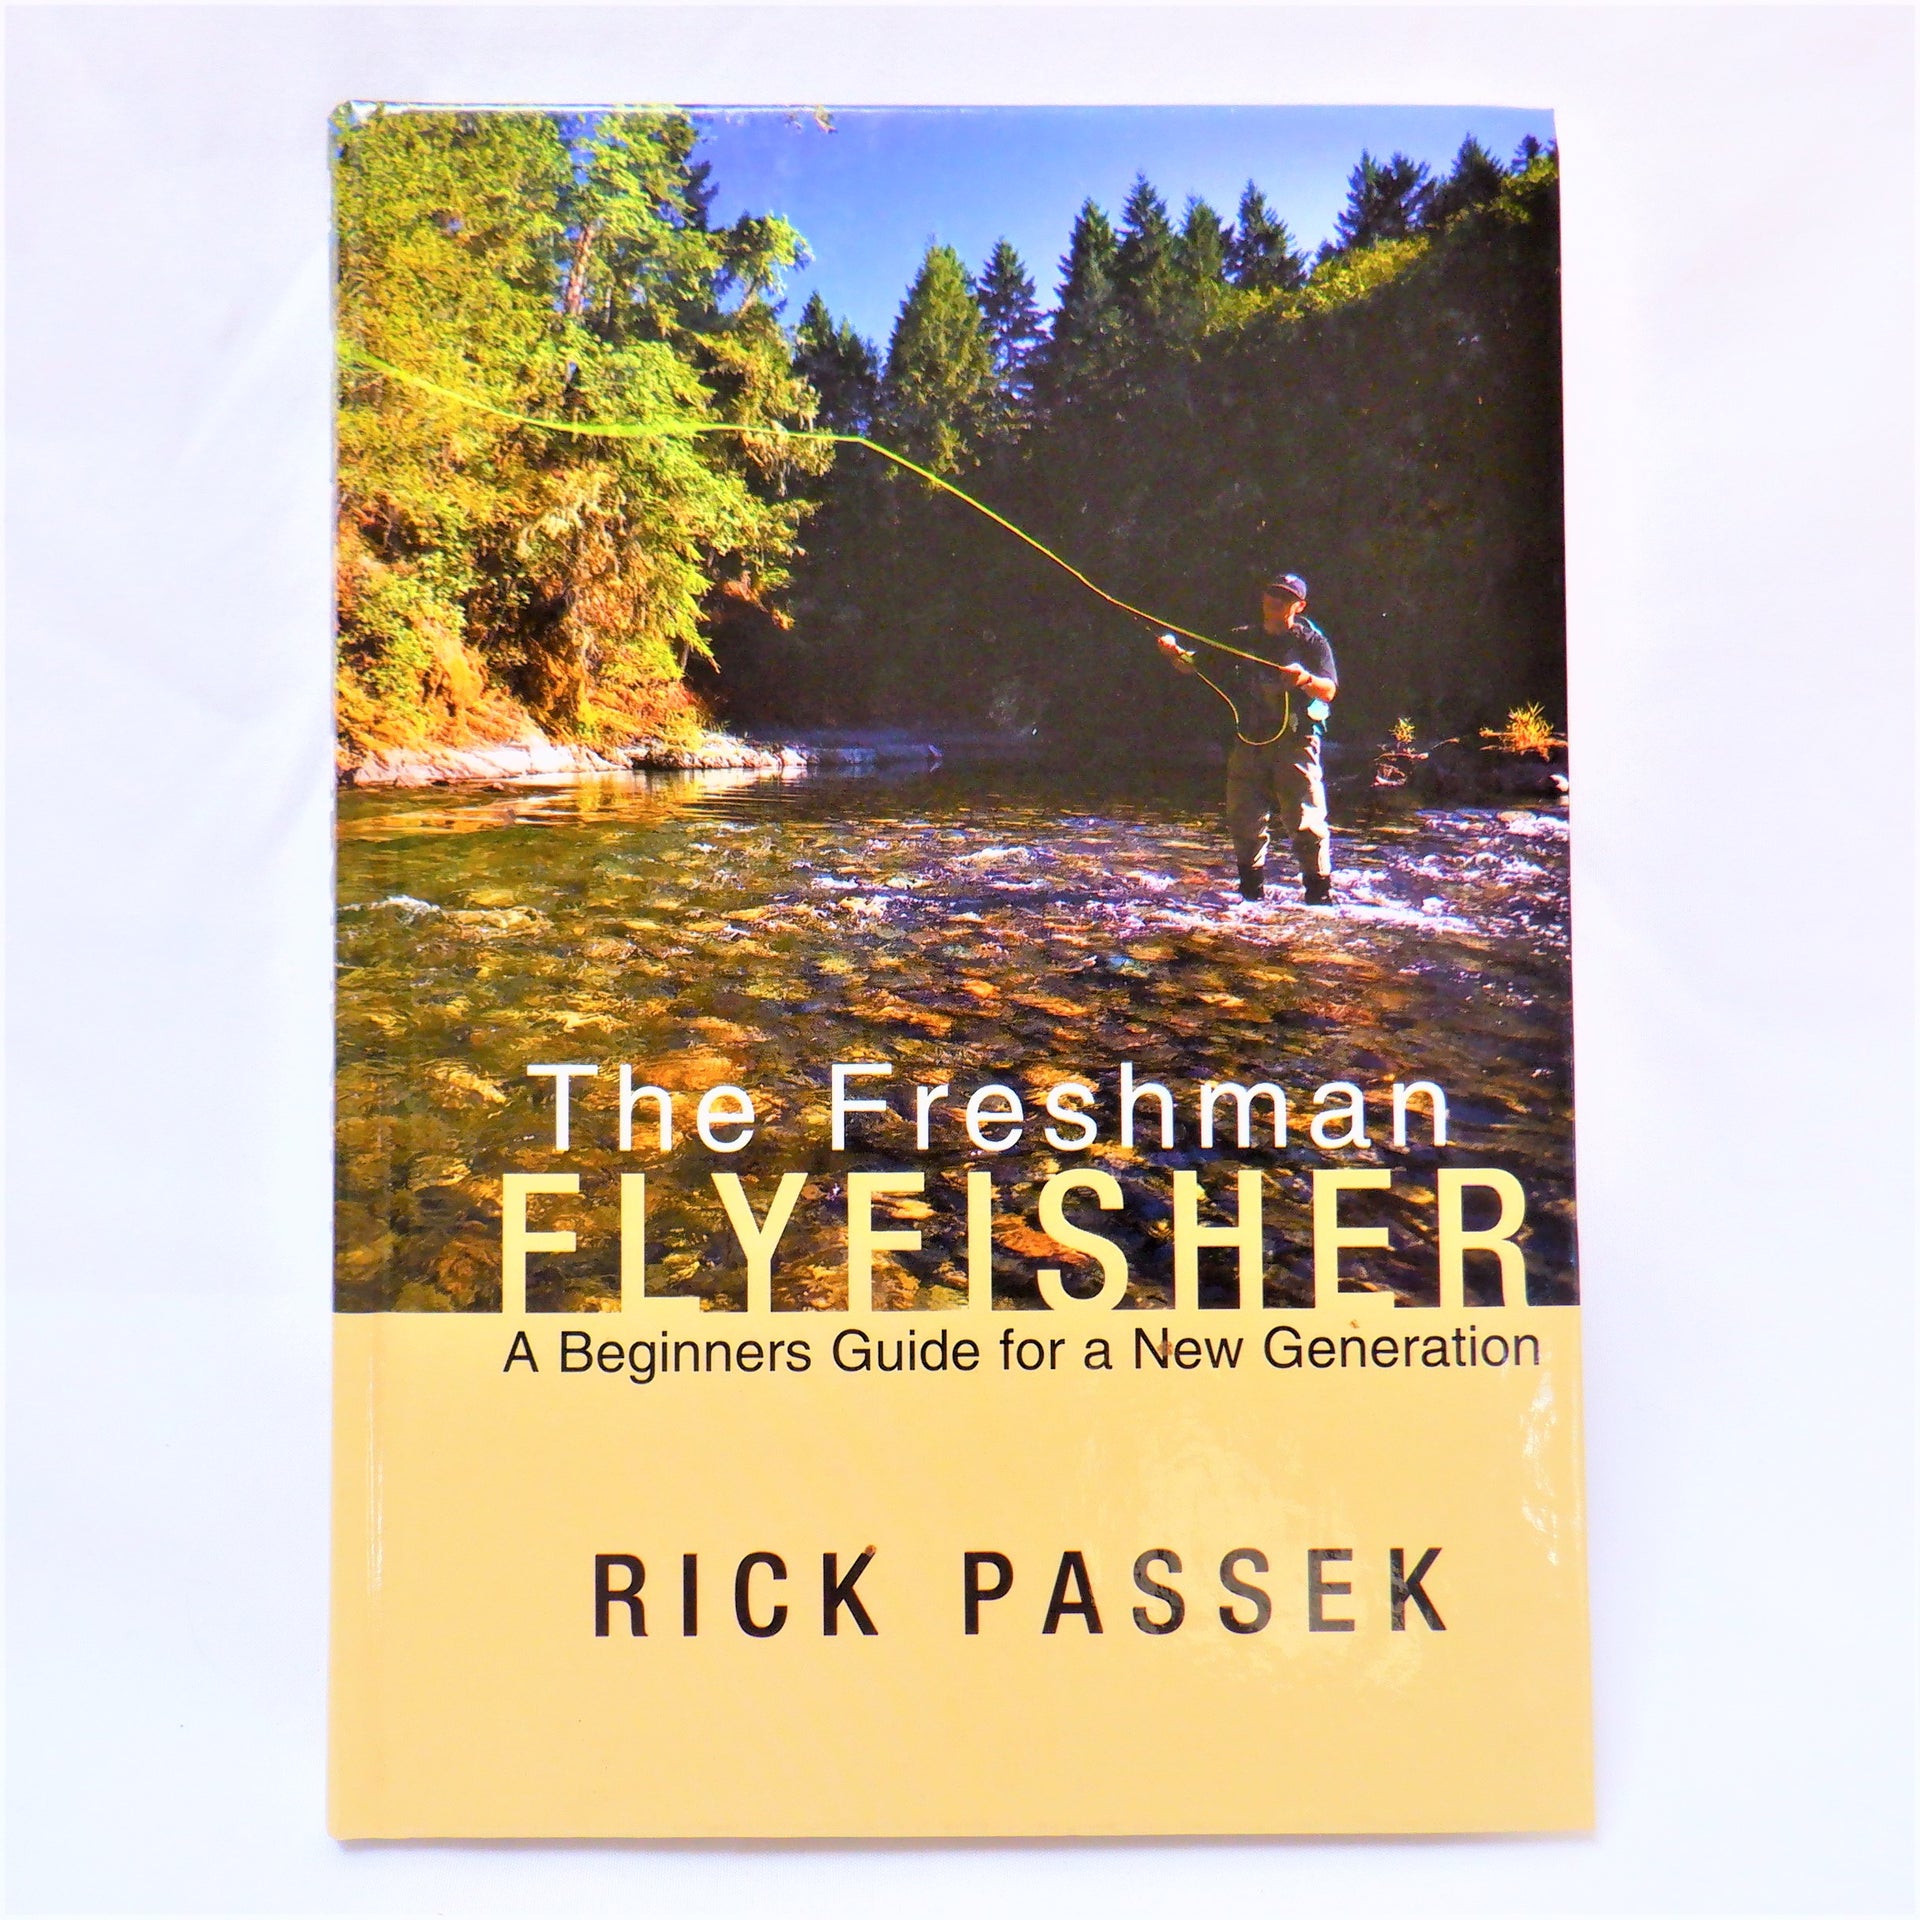 The Freshman Flyfisher: A Beginner's Guide for a New Generation by